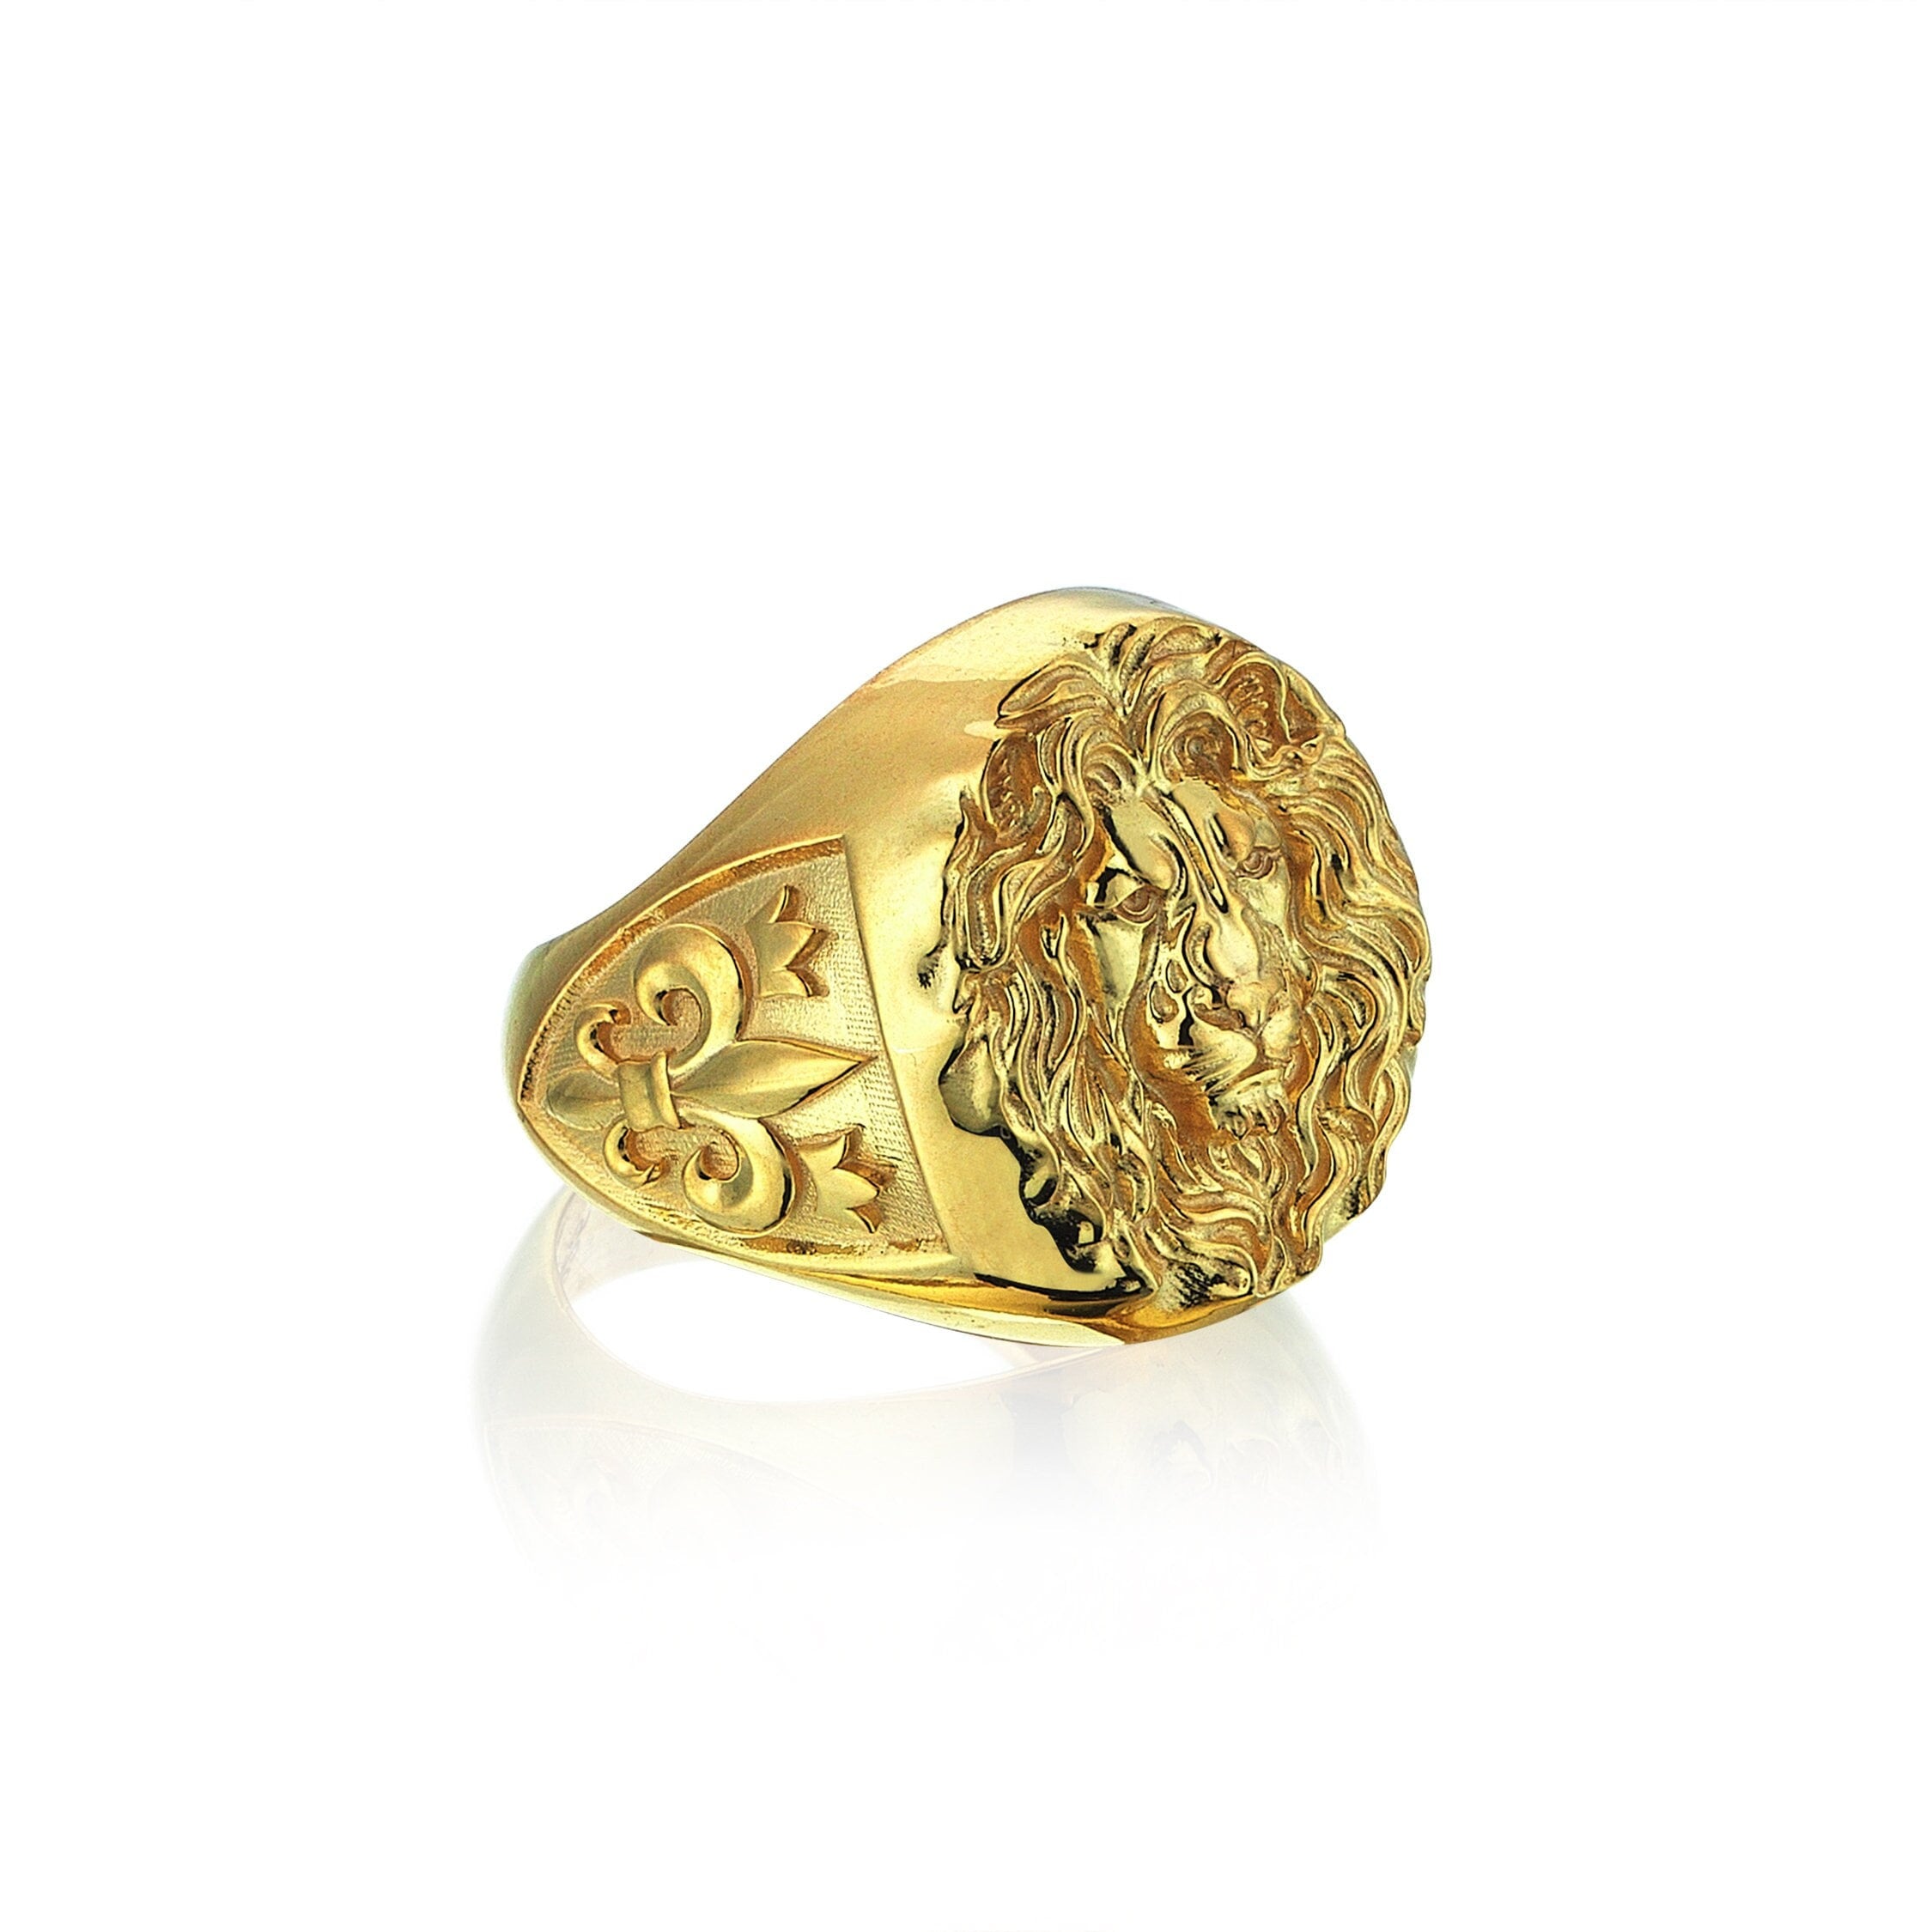 18K, 22K Real Solid Yellow Gold Lion Face Ring, Hallmark Handmade Unique  Ring for Men's, Valentine Gift - Etsy